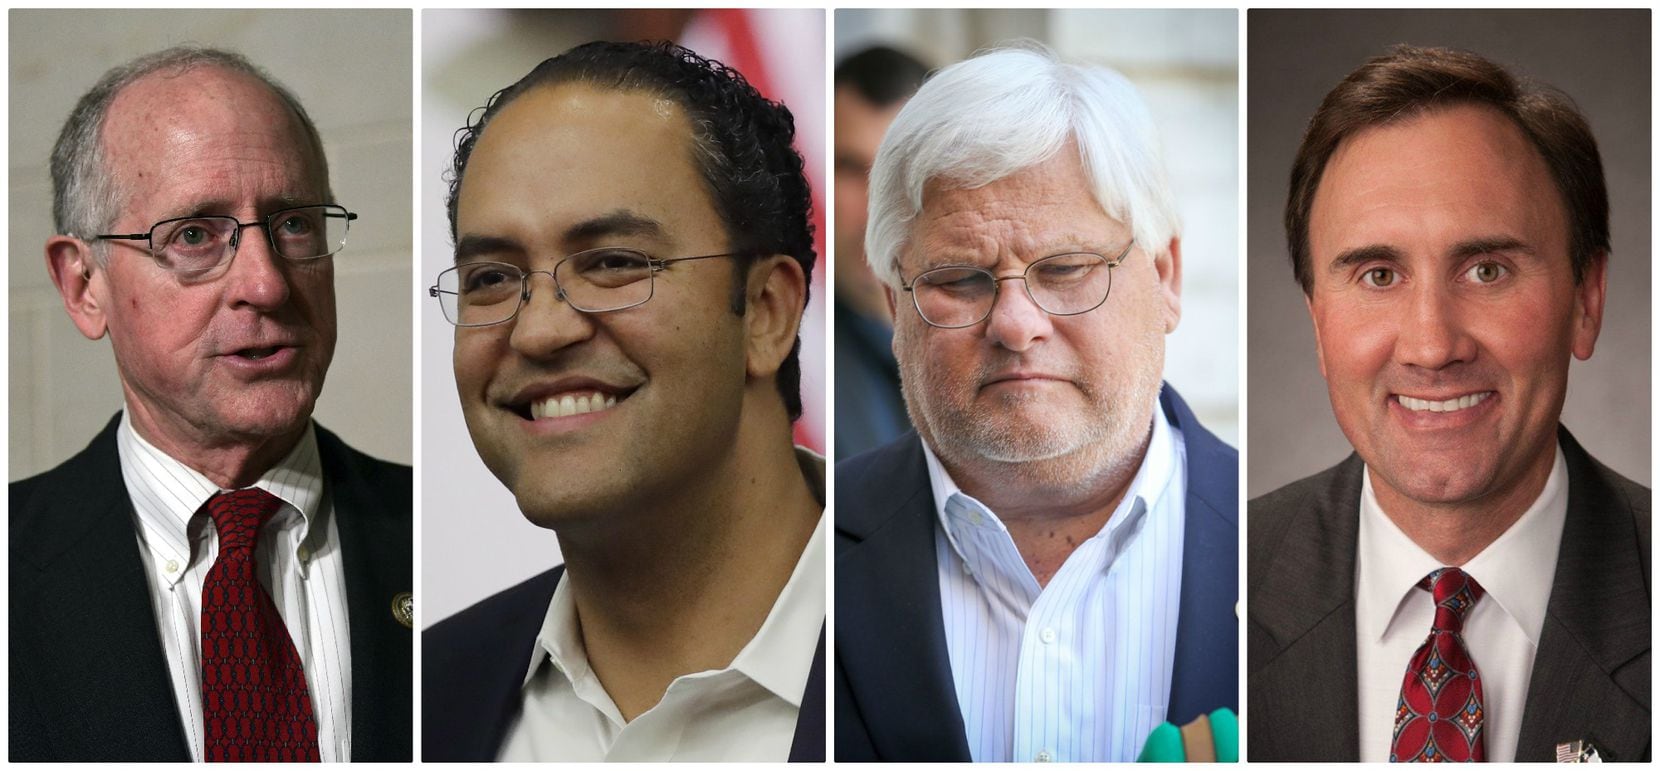 Four Texas Republicans in Congress recently announced that they would not seek reelection...